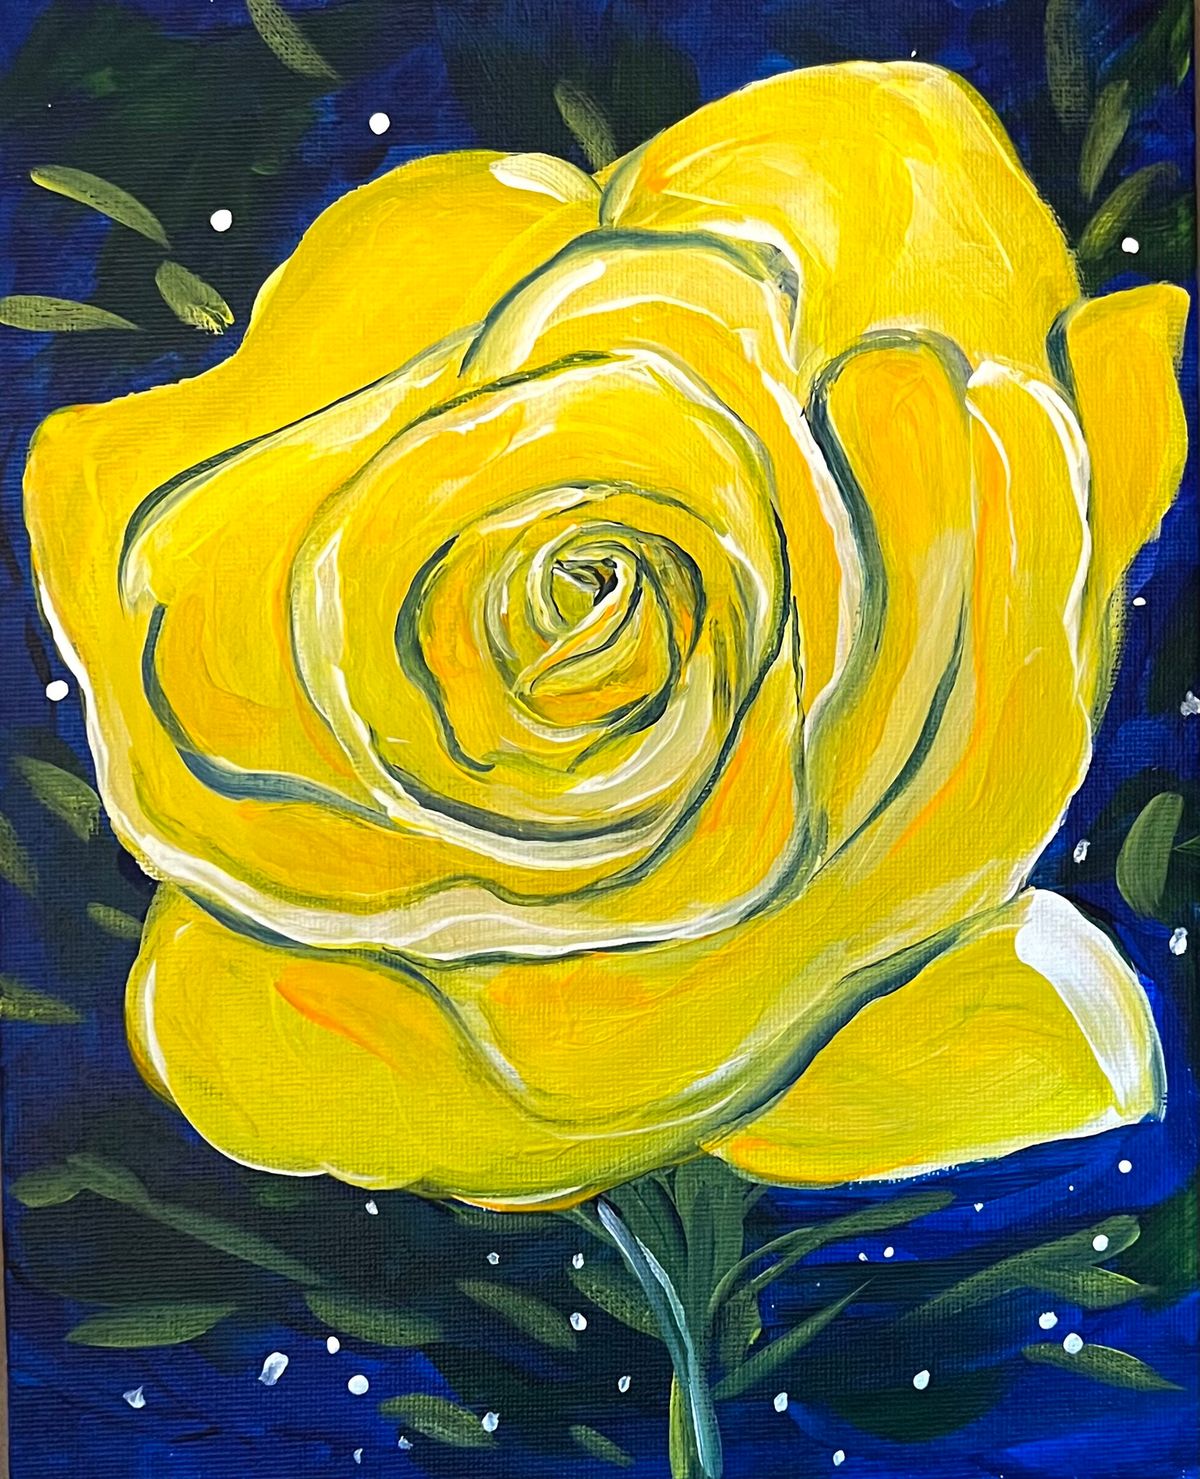 Painting Whimsical Roses with Acrylics